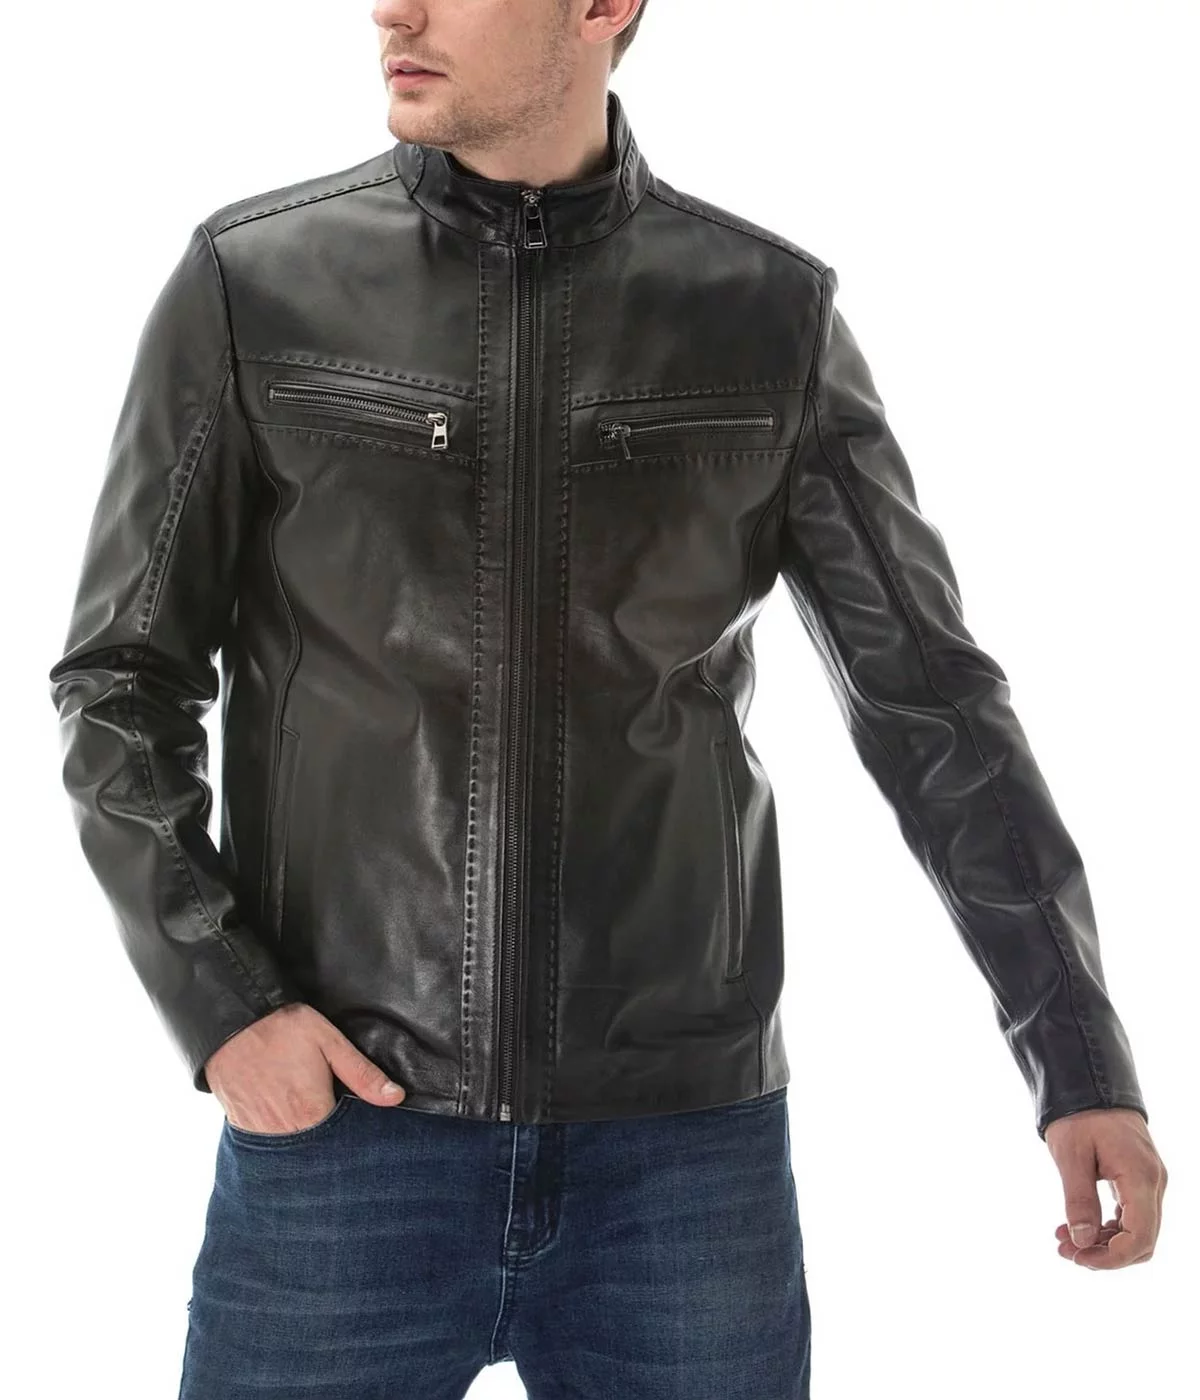 Black-Leather-Jacket-with-Stitching-Detail-for-Mens-01